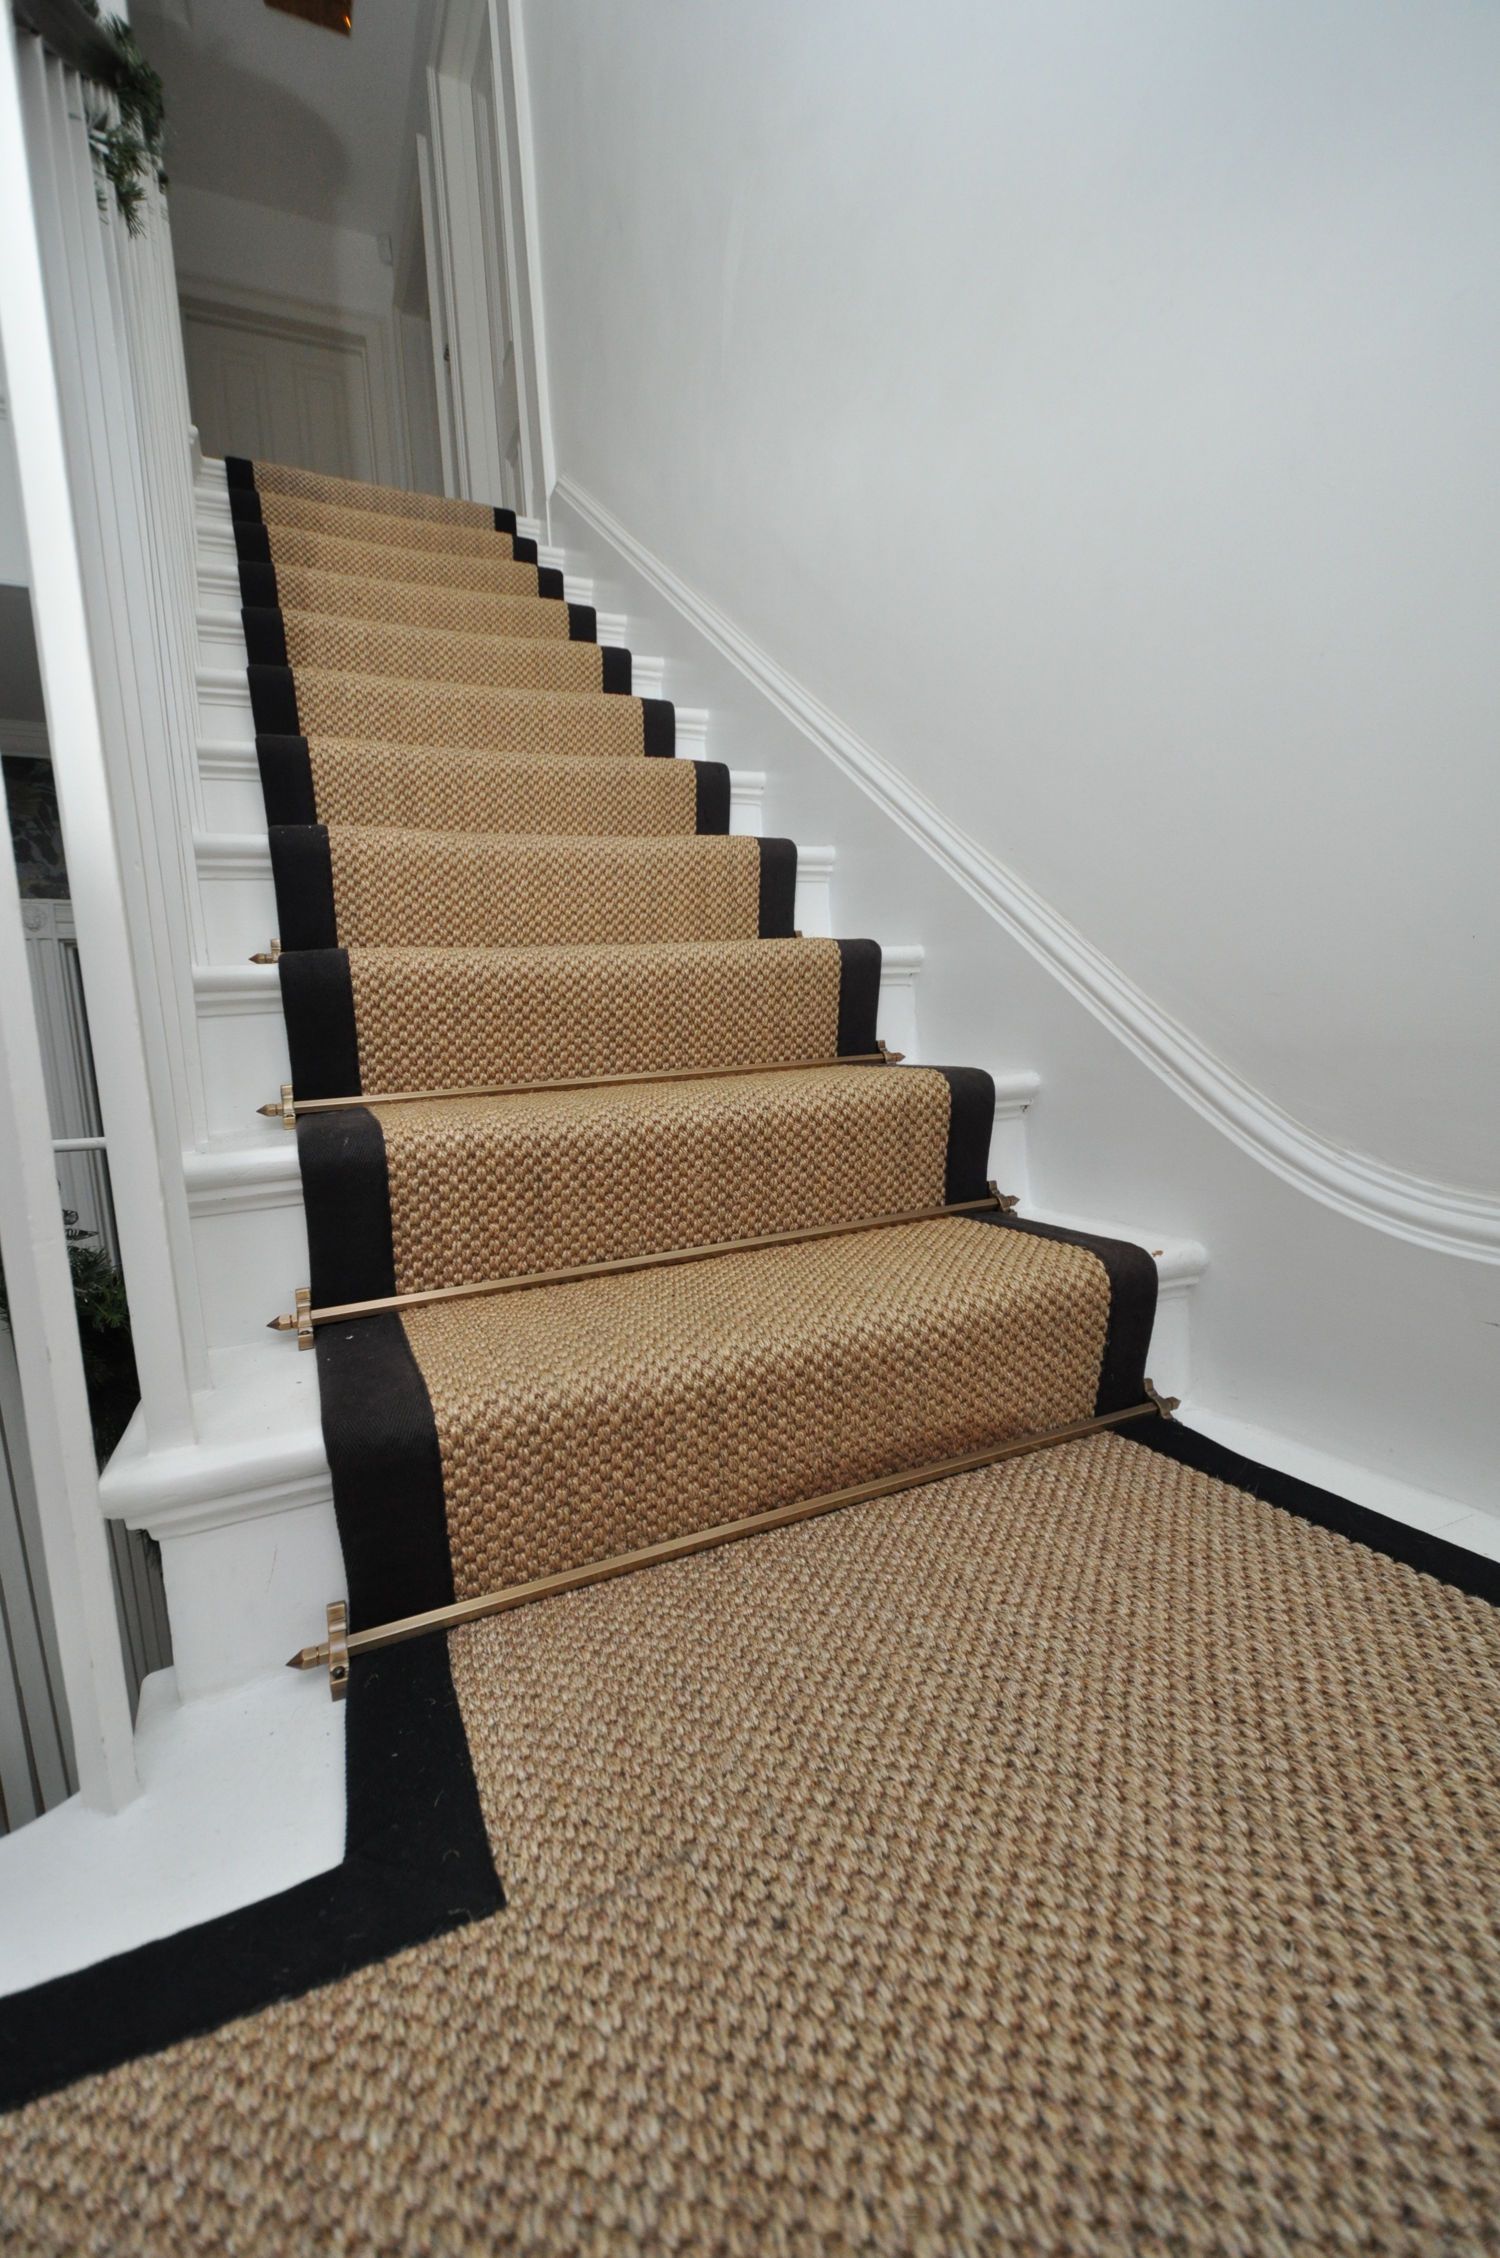 Stay safe with stair runners